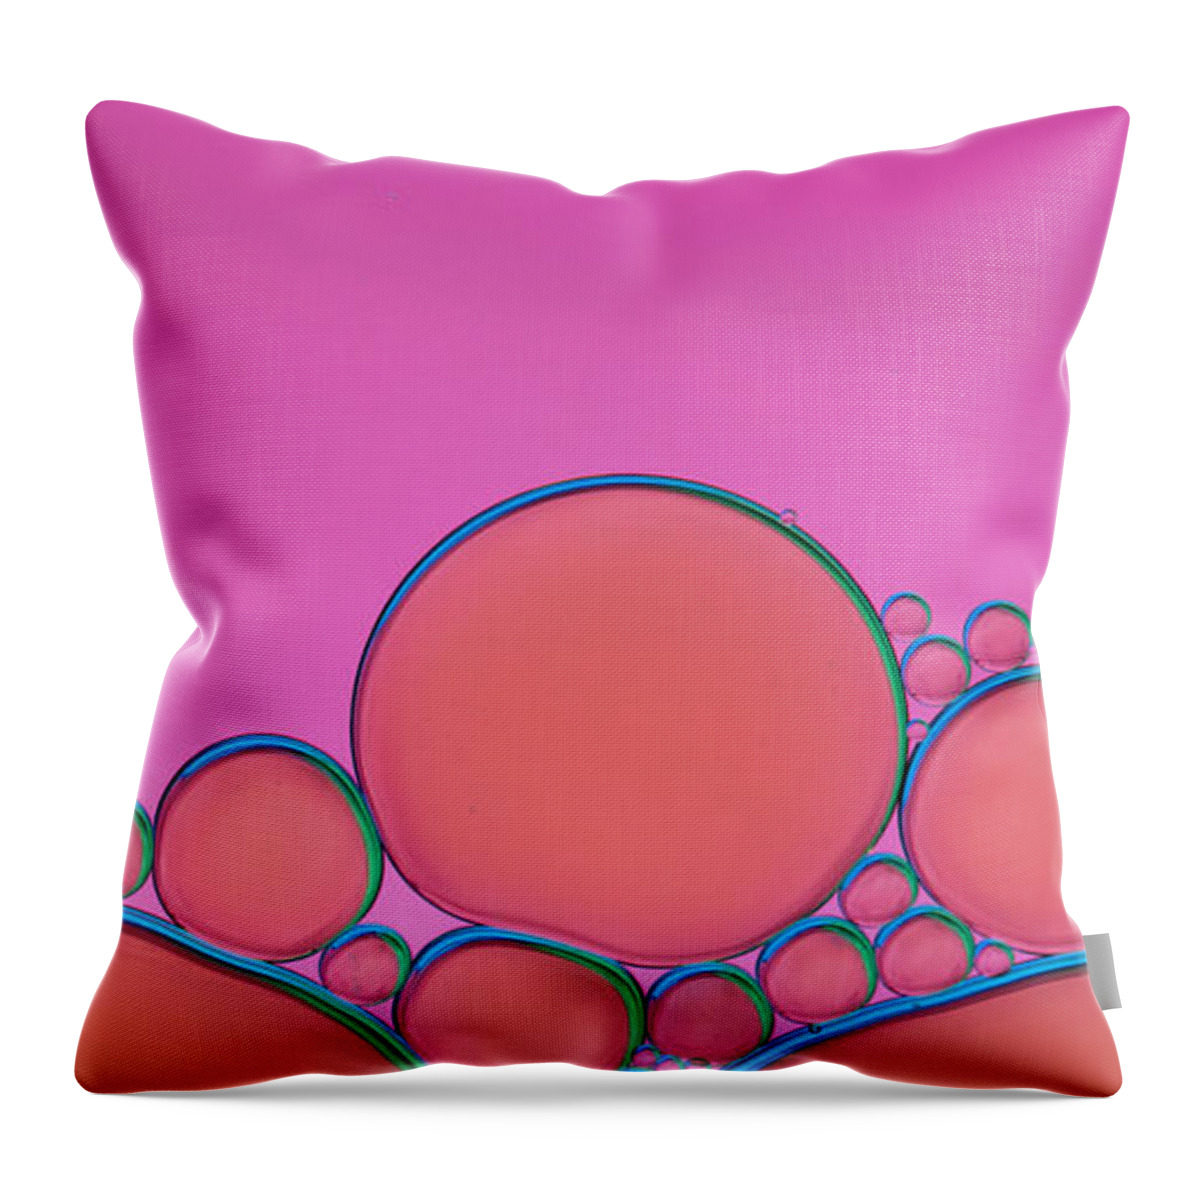 Oil Throw Pillow featuring the photograph Oil 20 by Rebecca Cozart